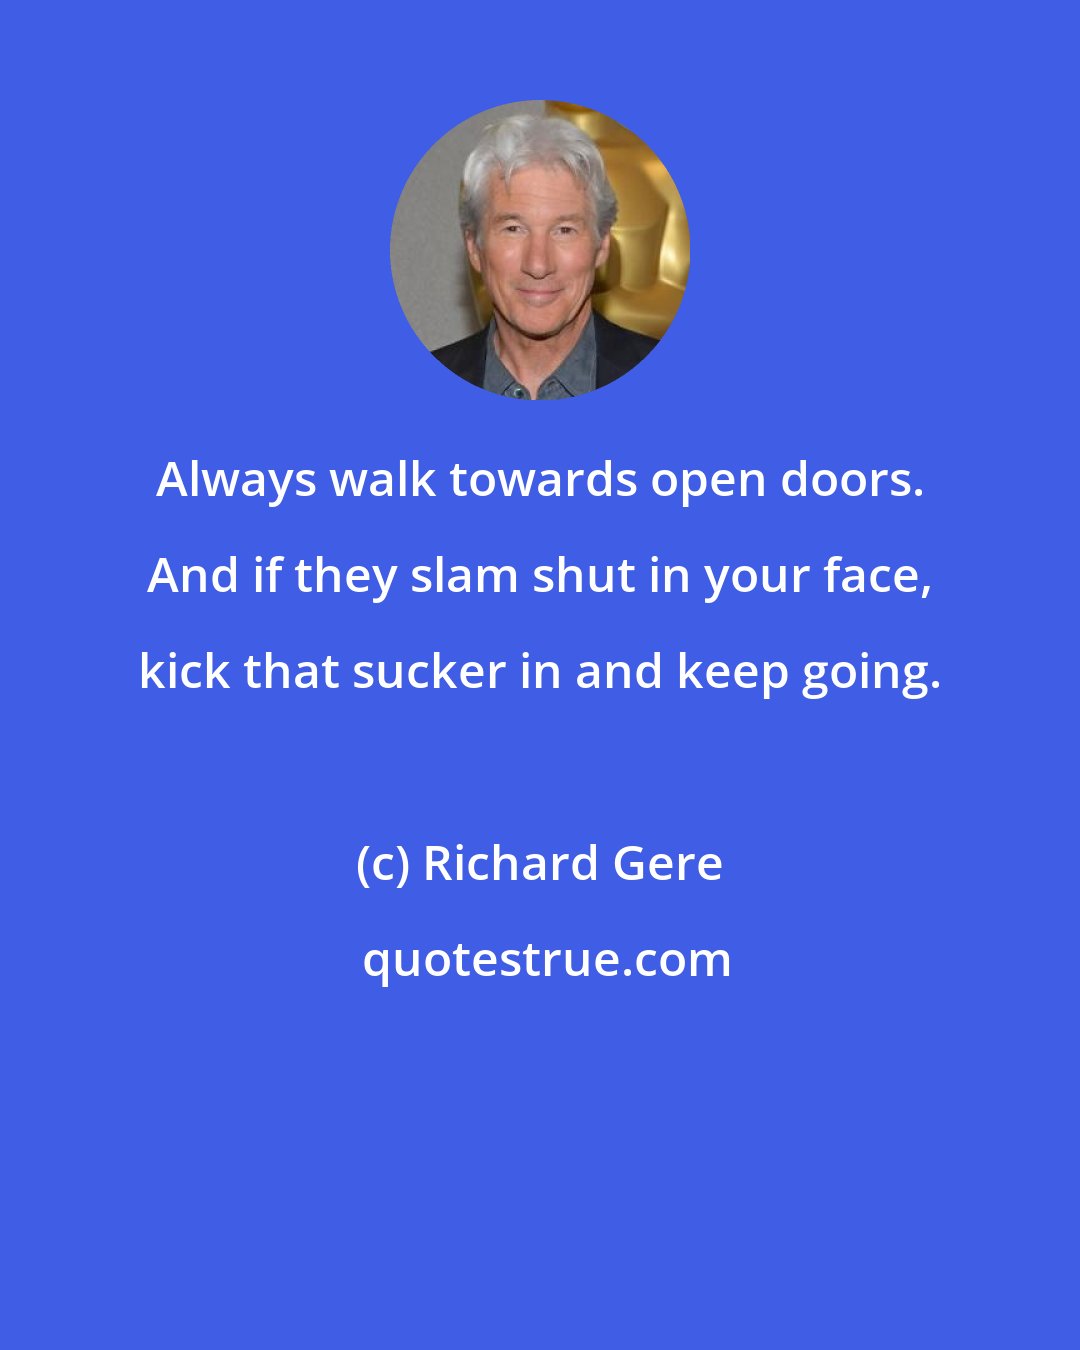 Richard Gere: Always walk towards open doors. And if they slam shut in your face, kick that sucker in and keep going.